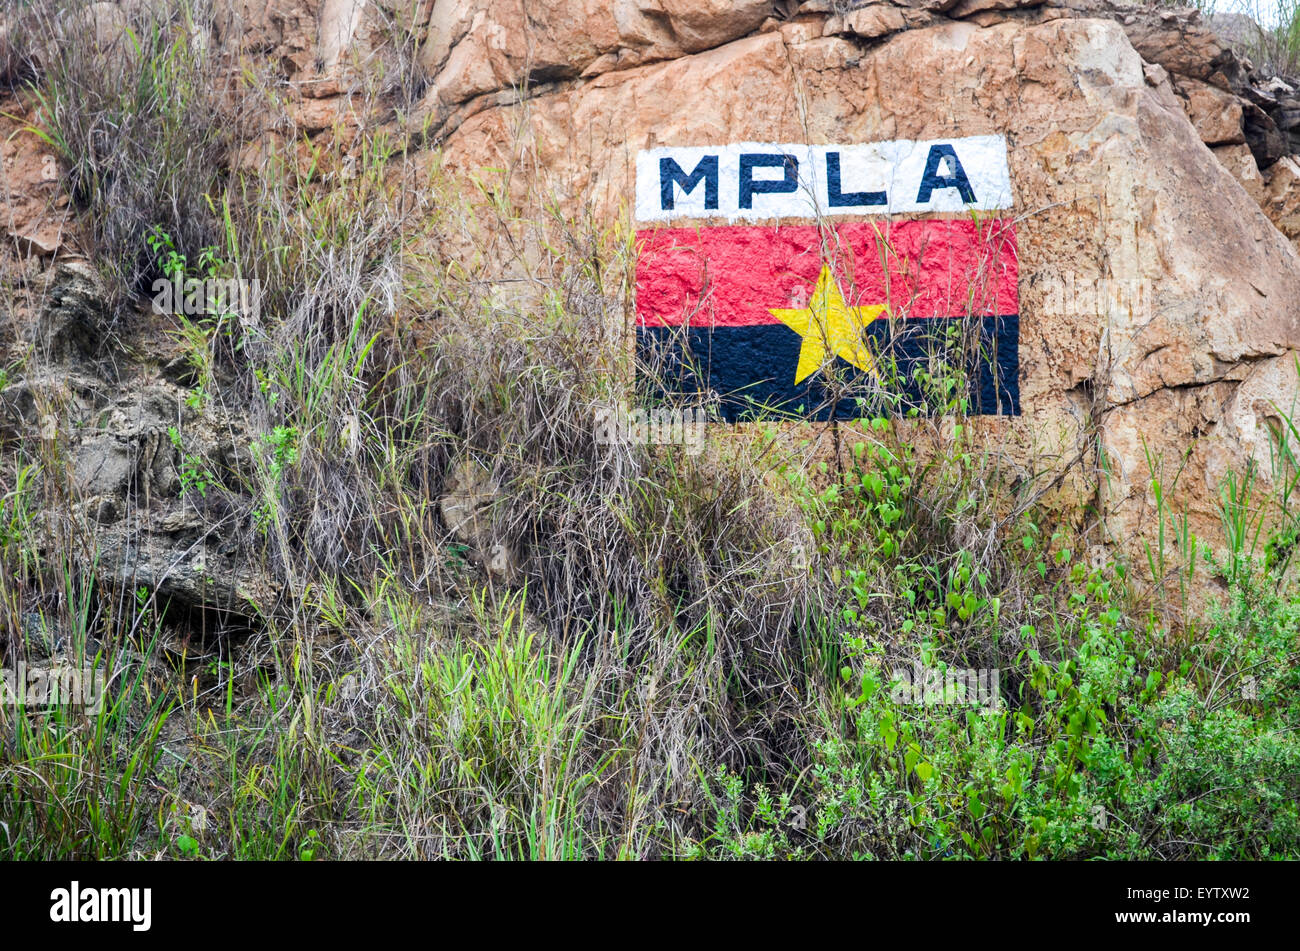 MPLA flag painted on a rock in the Zaire province of Angola Stock Photo